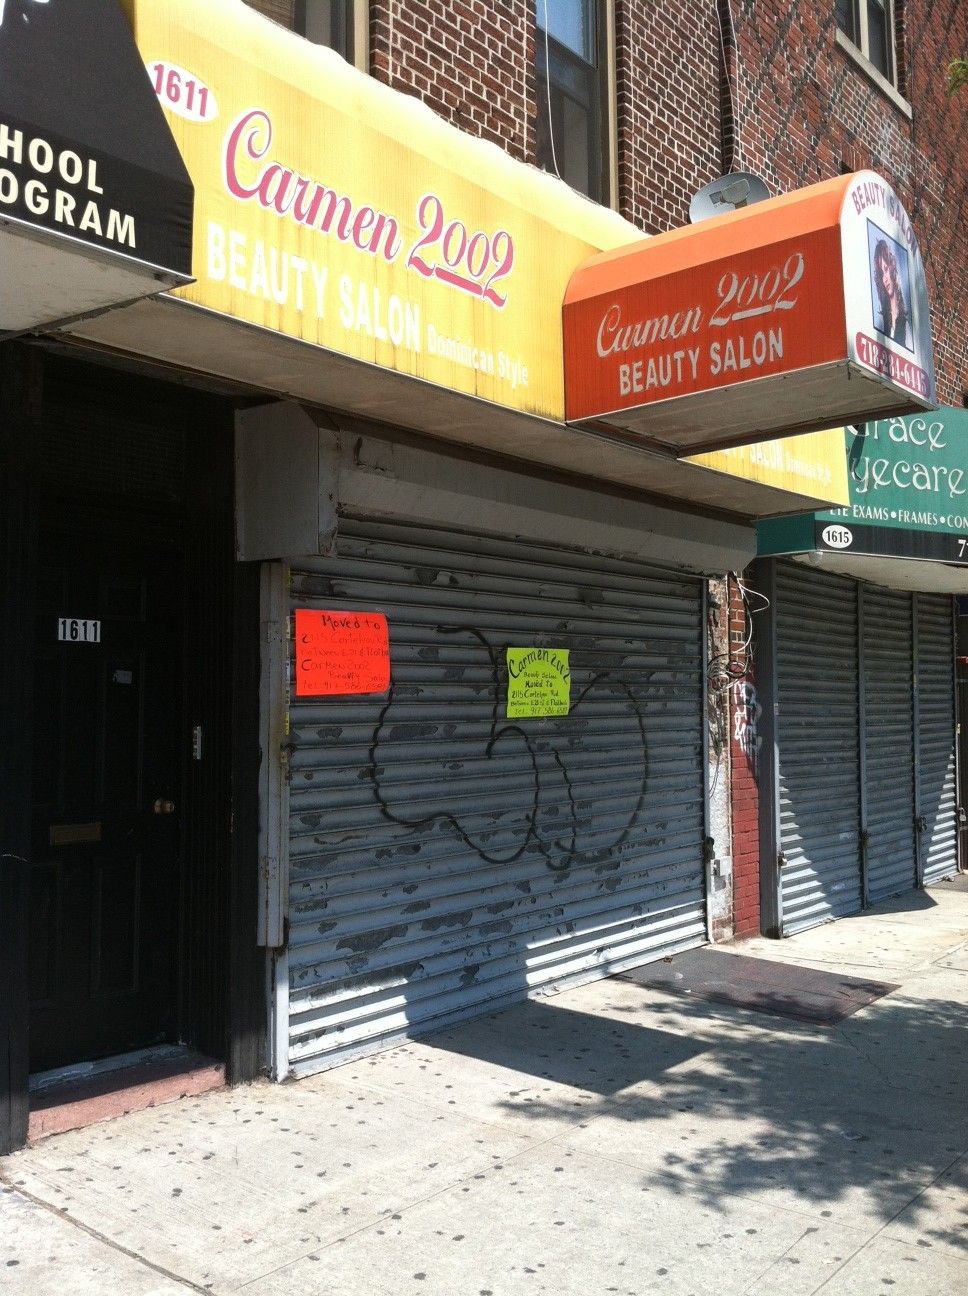 Another Space Available on Cortelyou